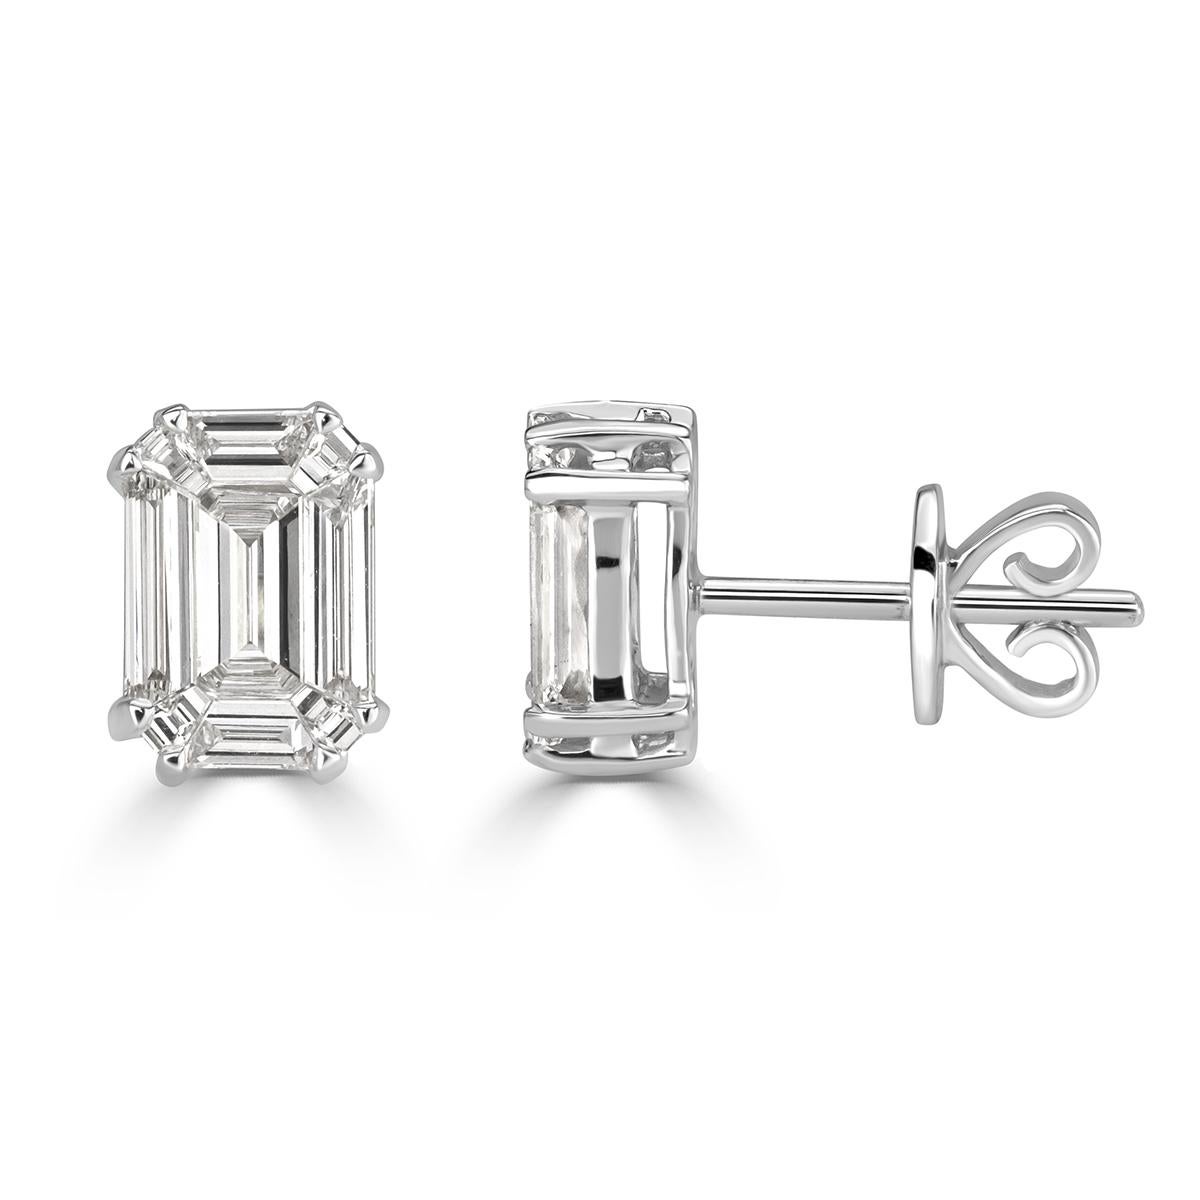 This elegant pair of diamond stud earrings showcases two emerald cut diamonds with a total weight of 0.88ct. They are graded at E-F in color, VS1-VS2 in clarity and measure 7.80 x 5.40mm. They are set in a double prong, 18k white gold setting.
